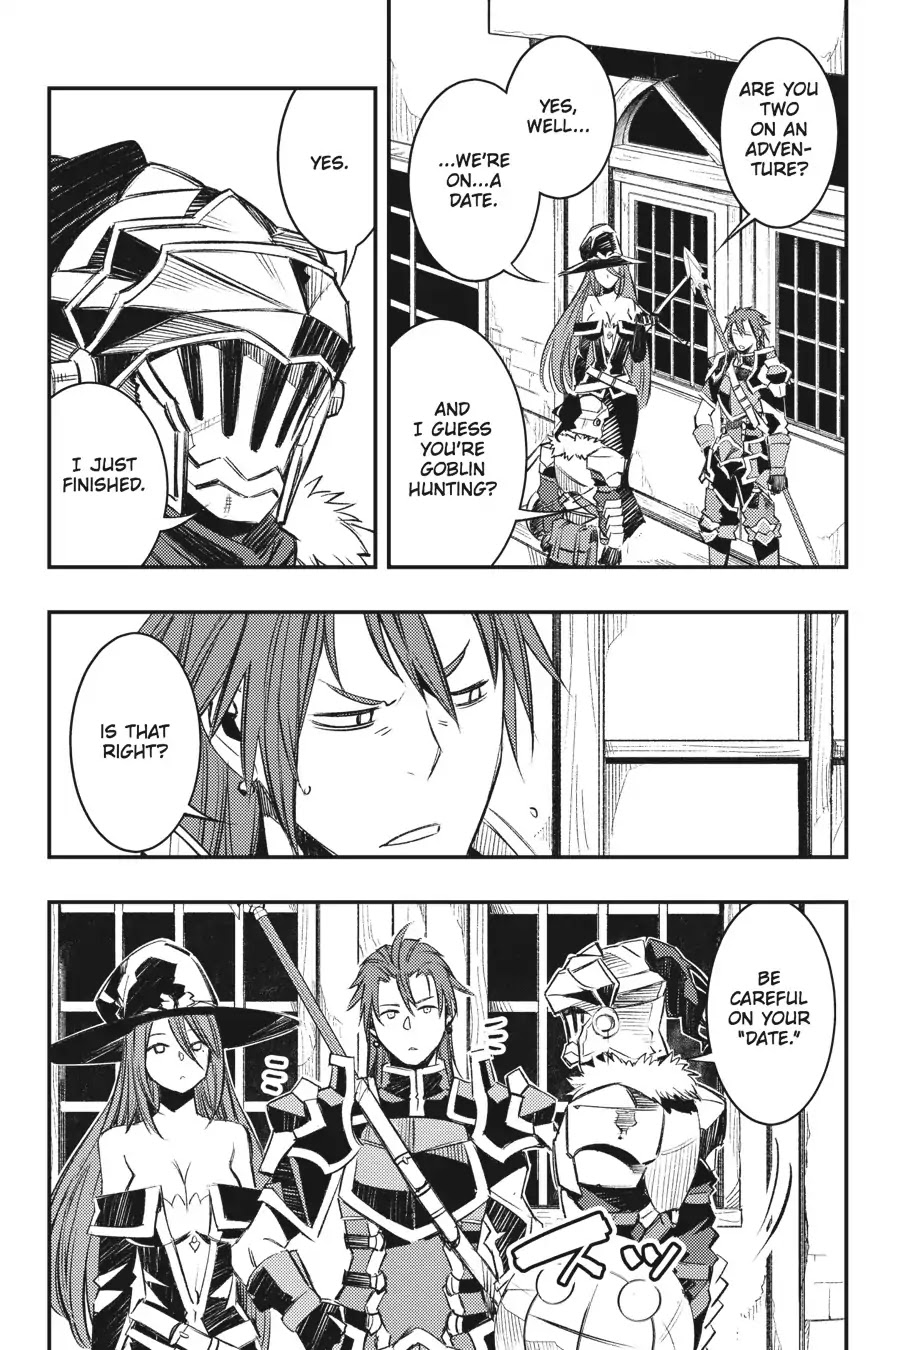 Goblin Slayer: Brand New Day Chapter 10: Of Going There and Back Again [END]